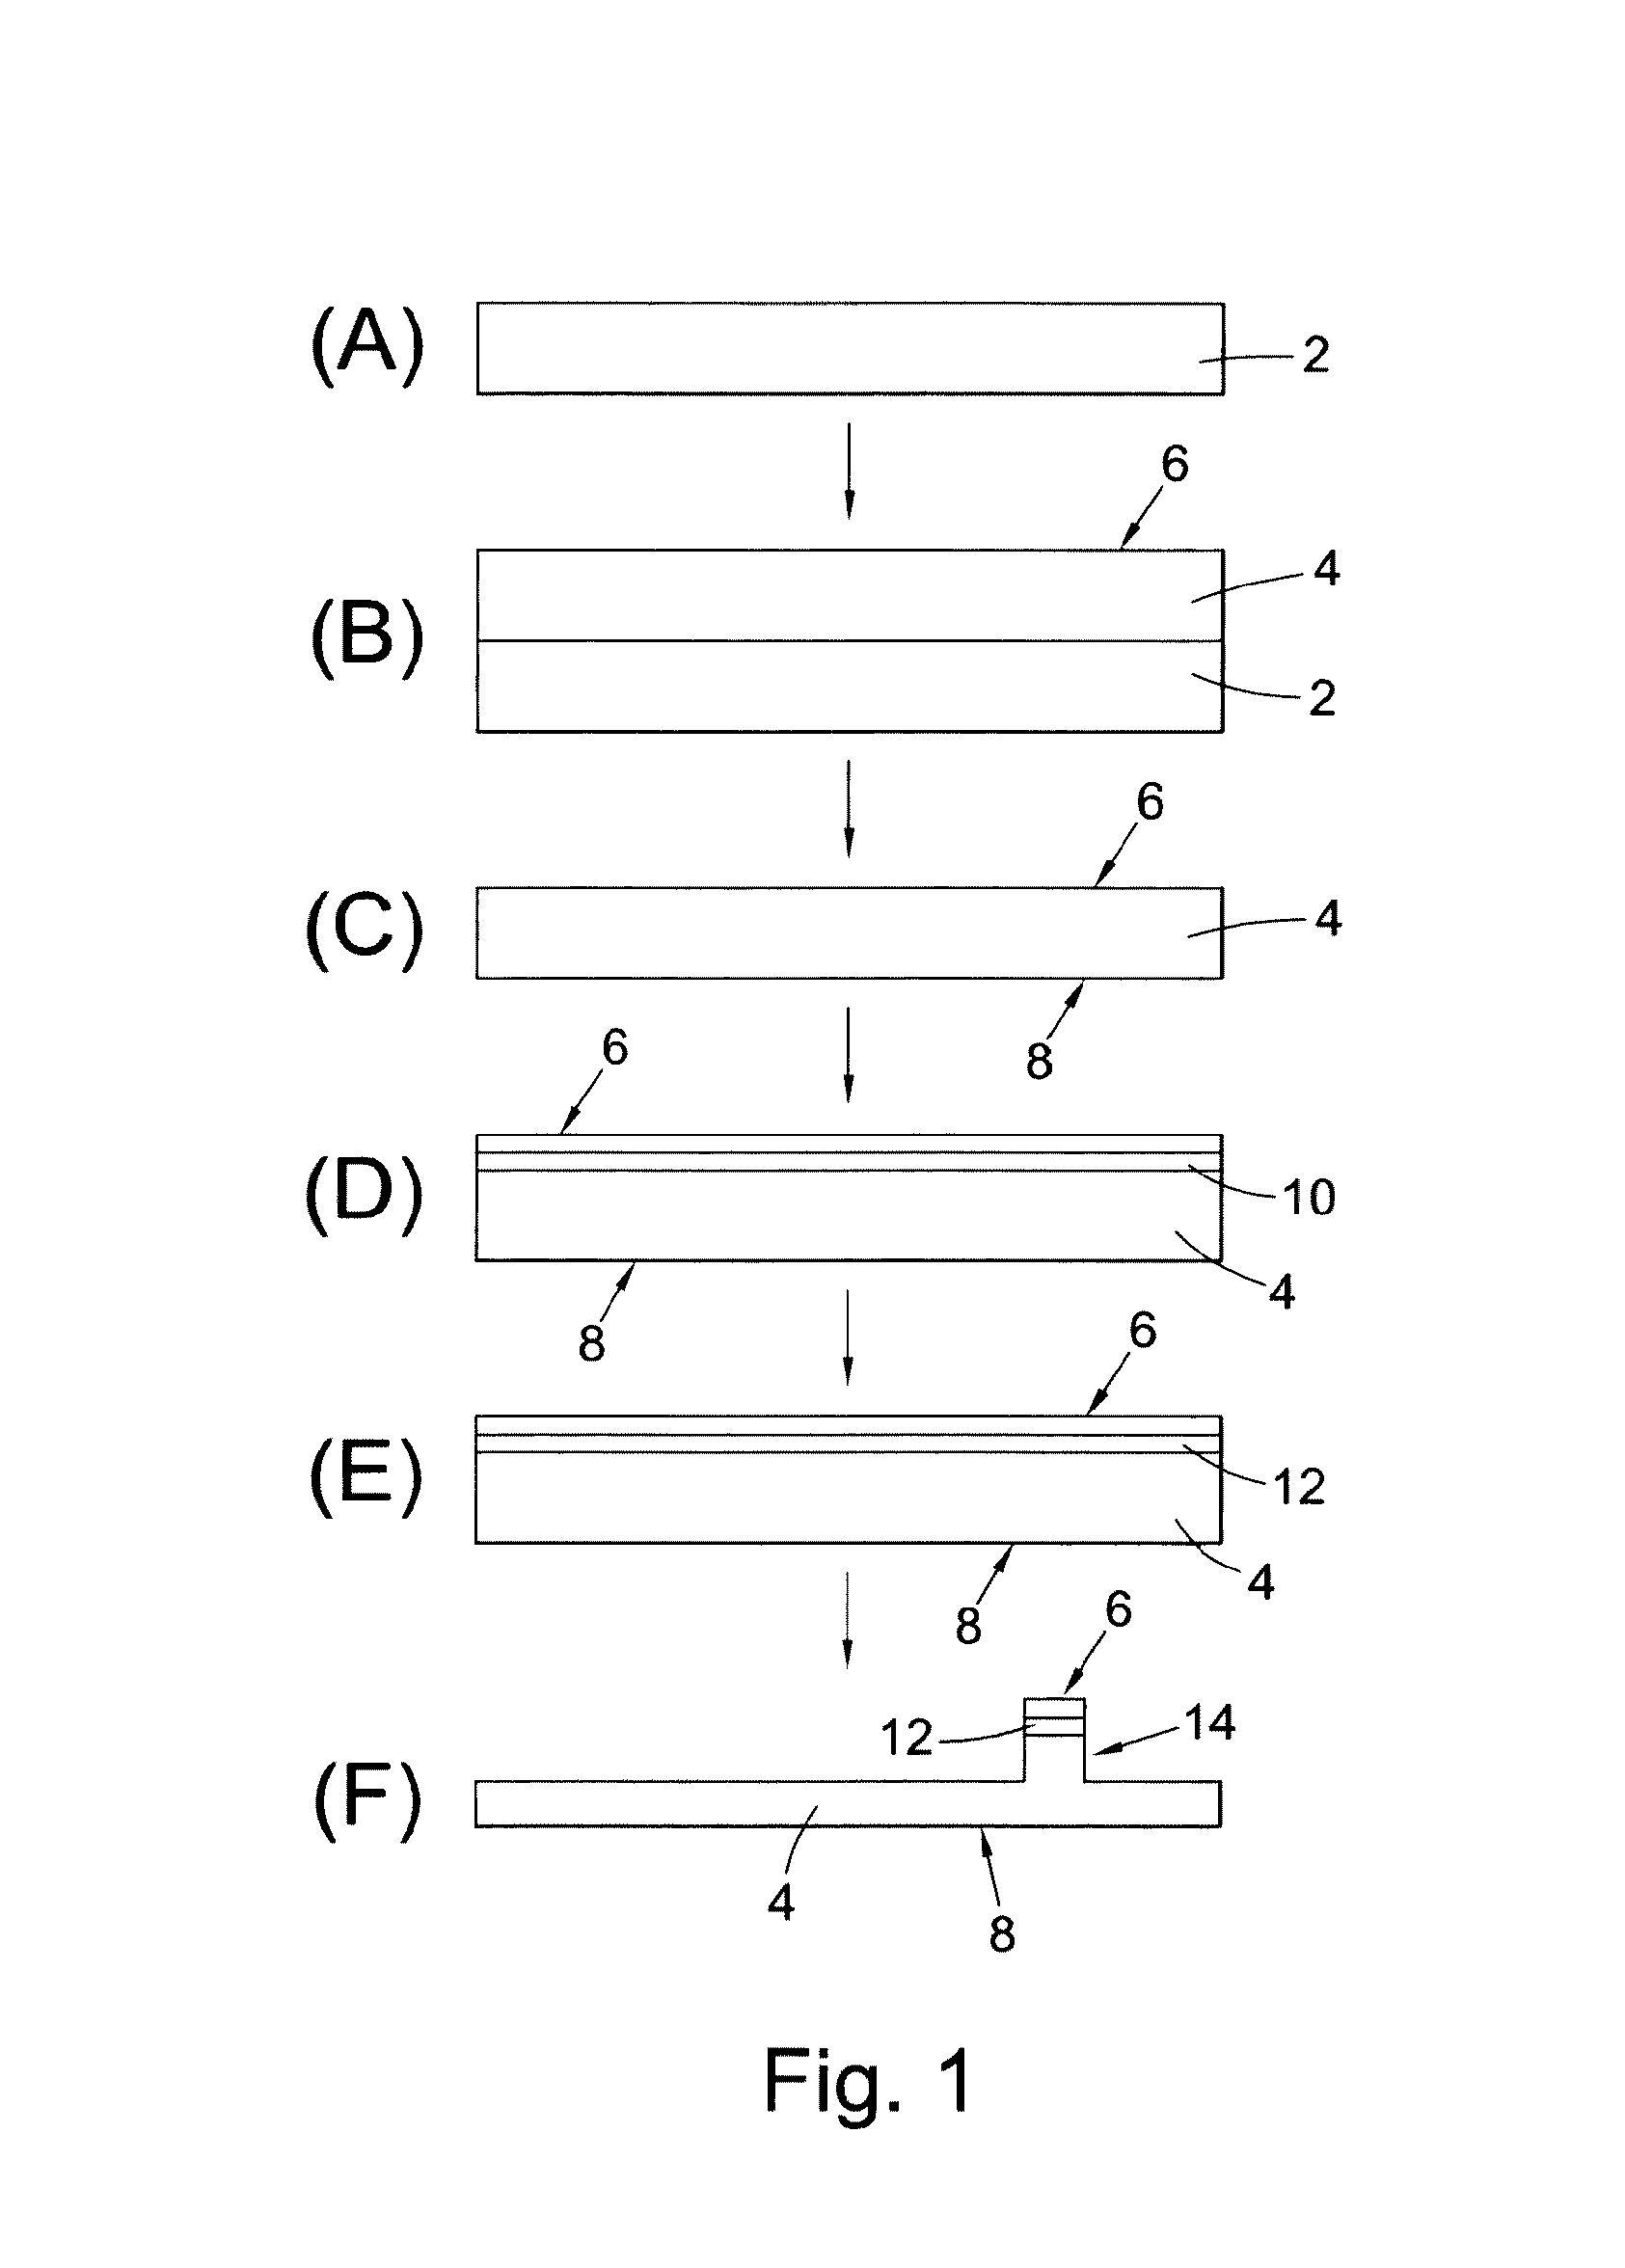 Diamond components for quantum imaging, sensing and information processing devices